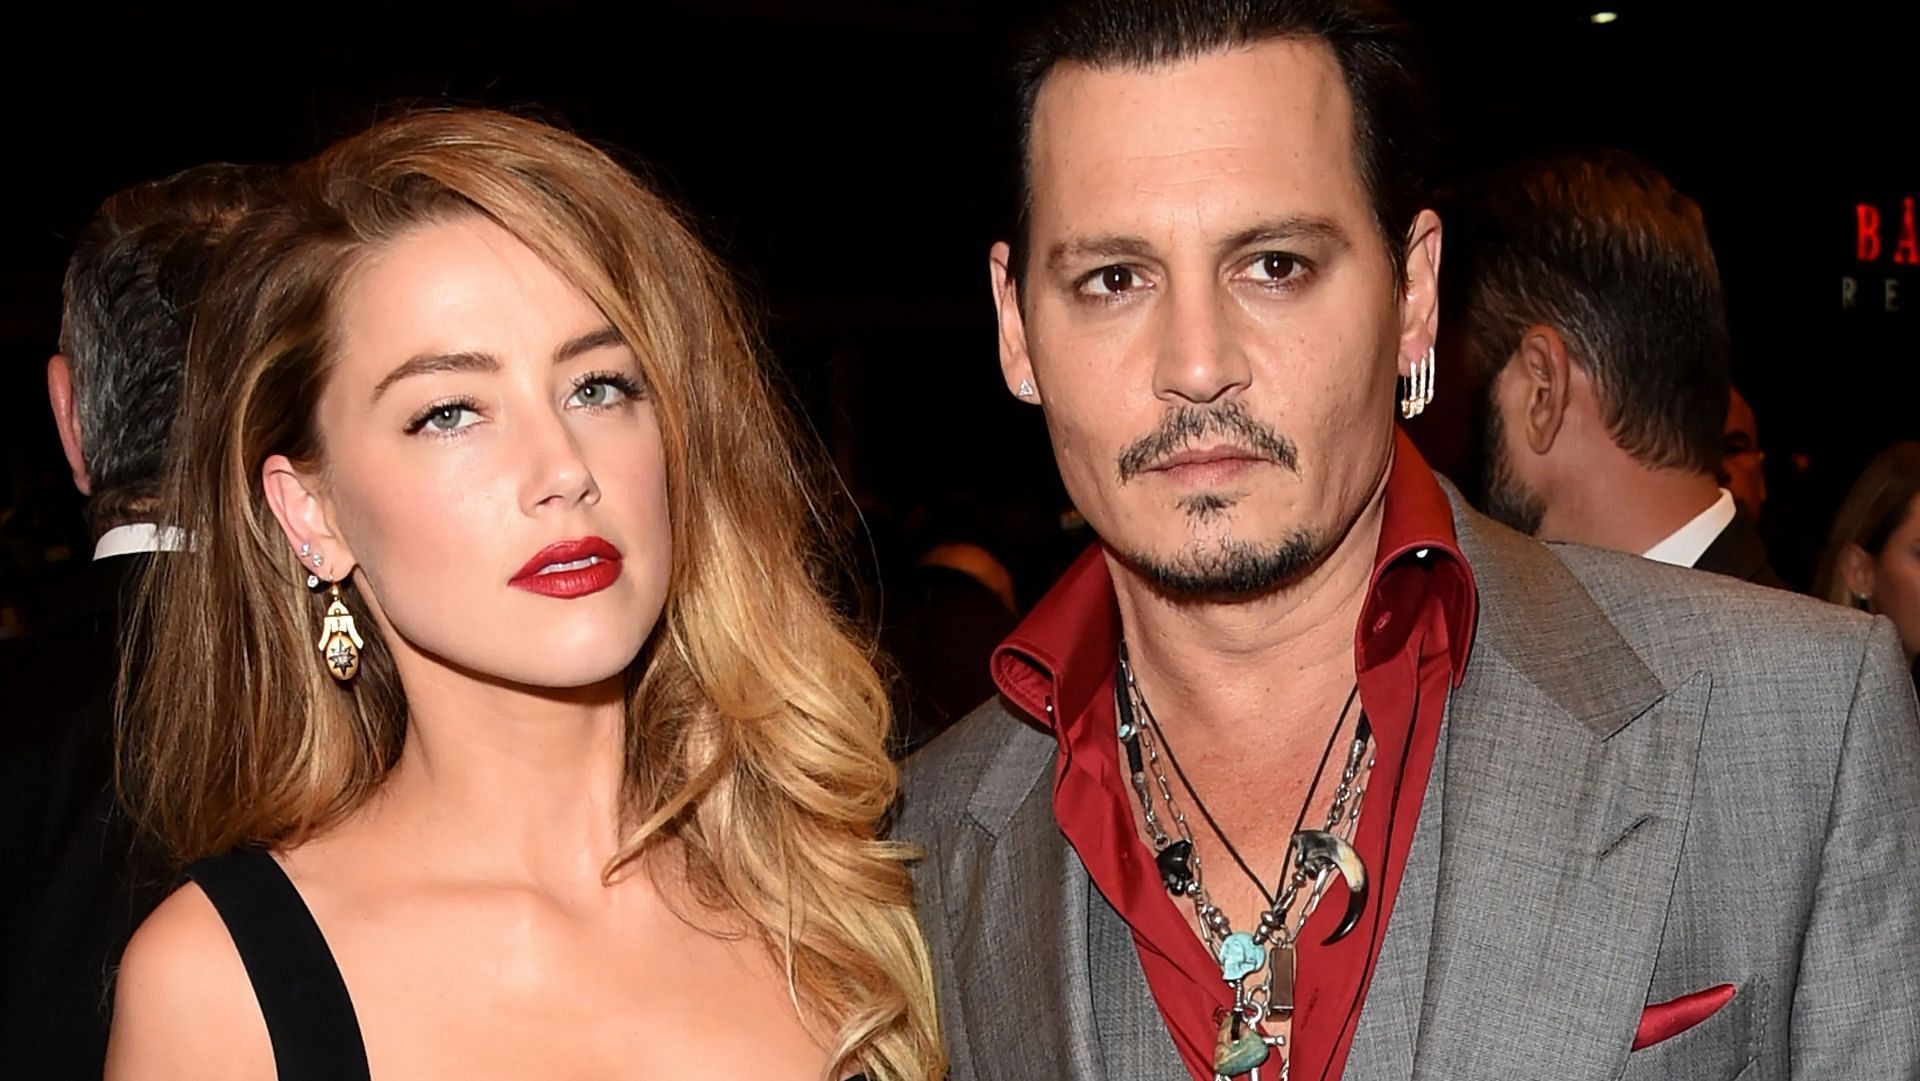 Johnny Depp and Amber Heard were married from 2015 to 2017. (Image via Getty Images)